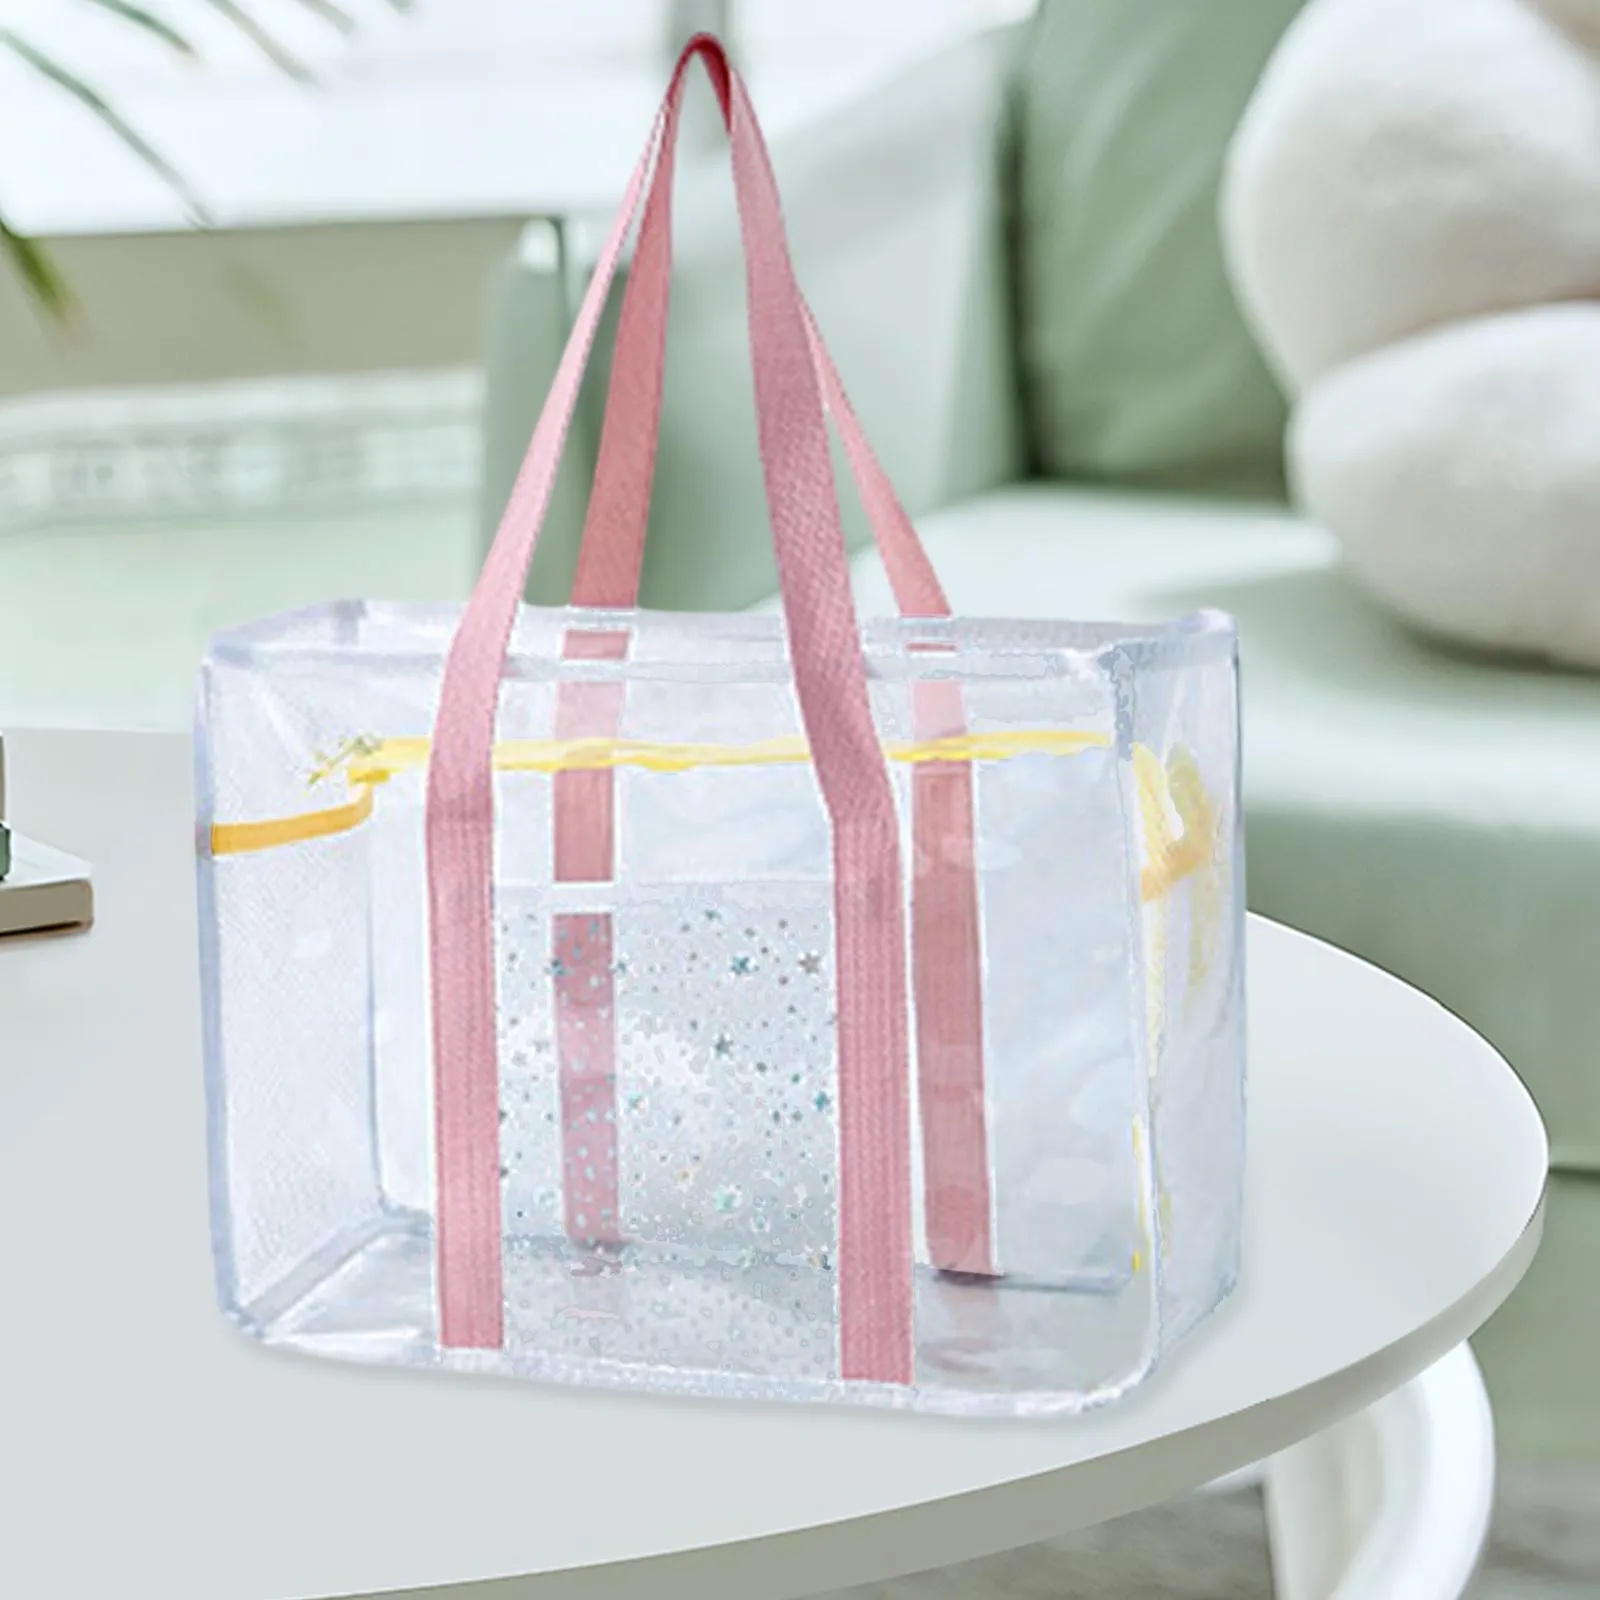 Clear Tote Bag Travel Storage Bag Thick PVC Large Capacity Transparent Shoulder Bag for Stadium Sports Game Street Daily Travel